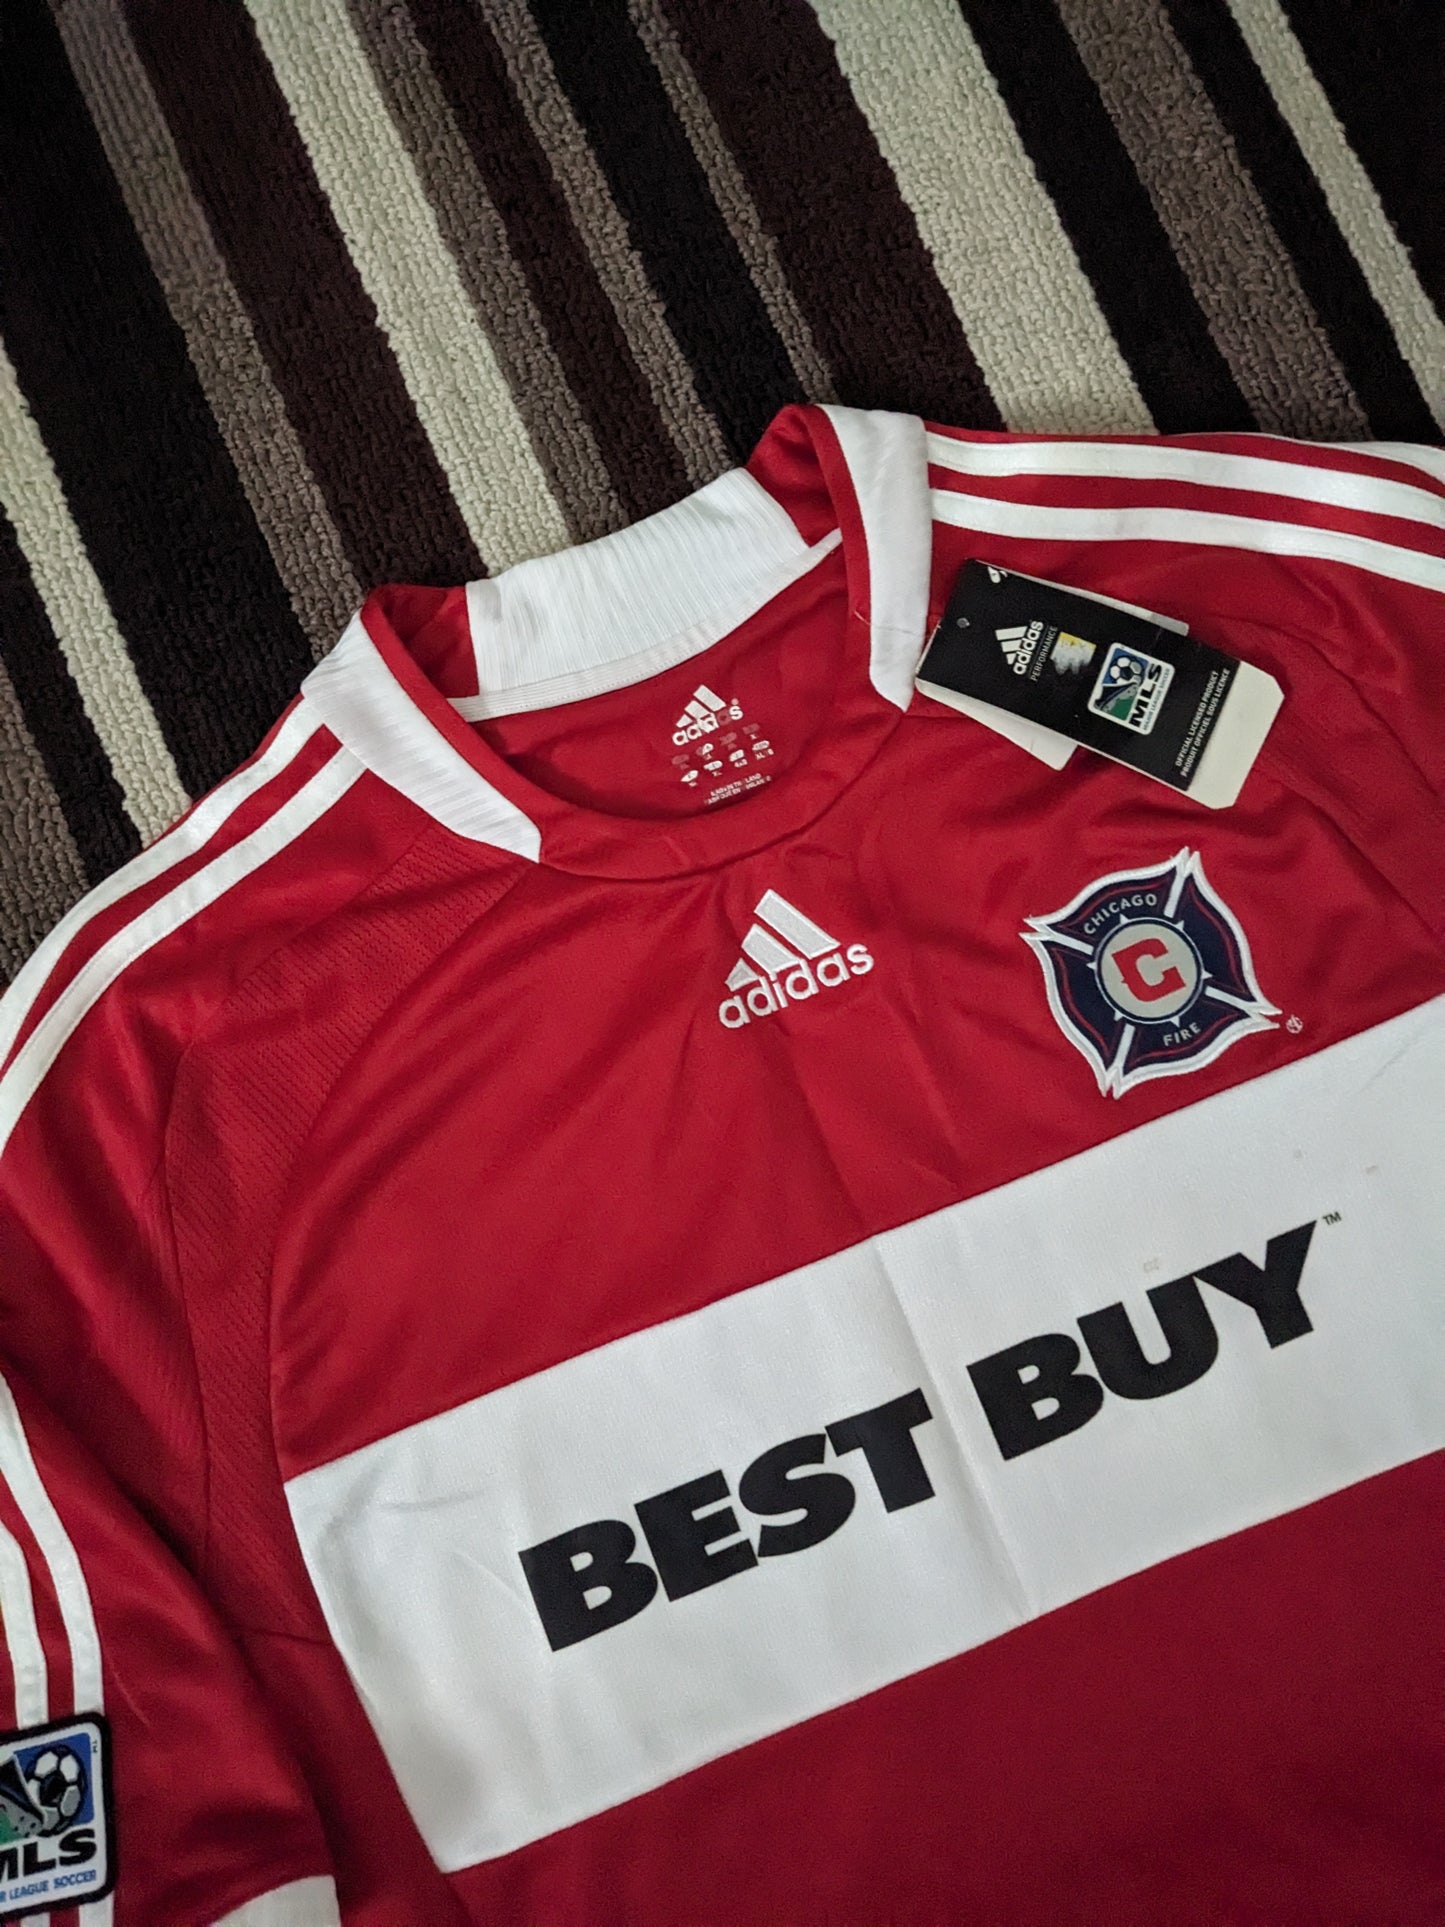 Chicago Fire 2008/2009 home jersey (XL) * BRAND NEW WITH TAGS